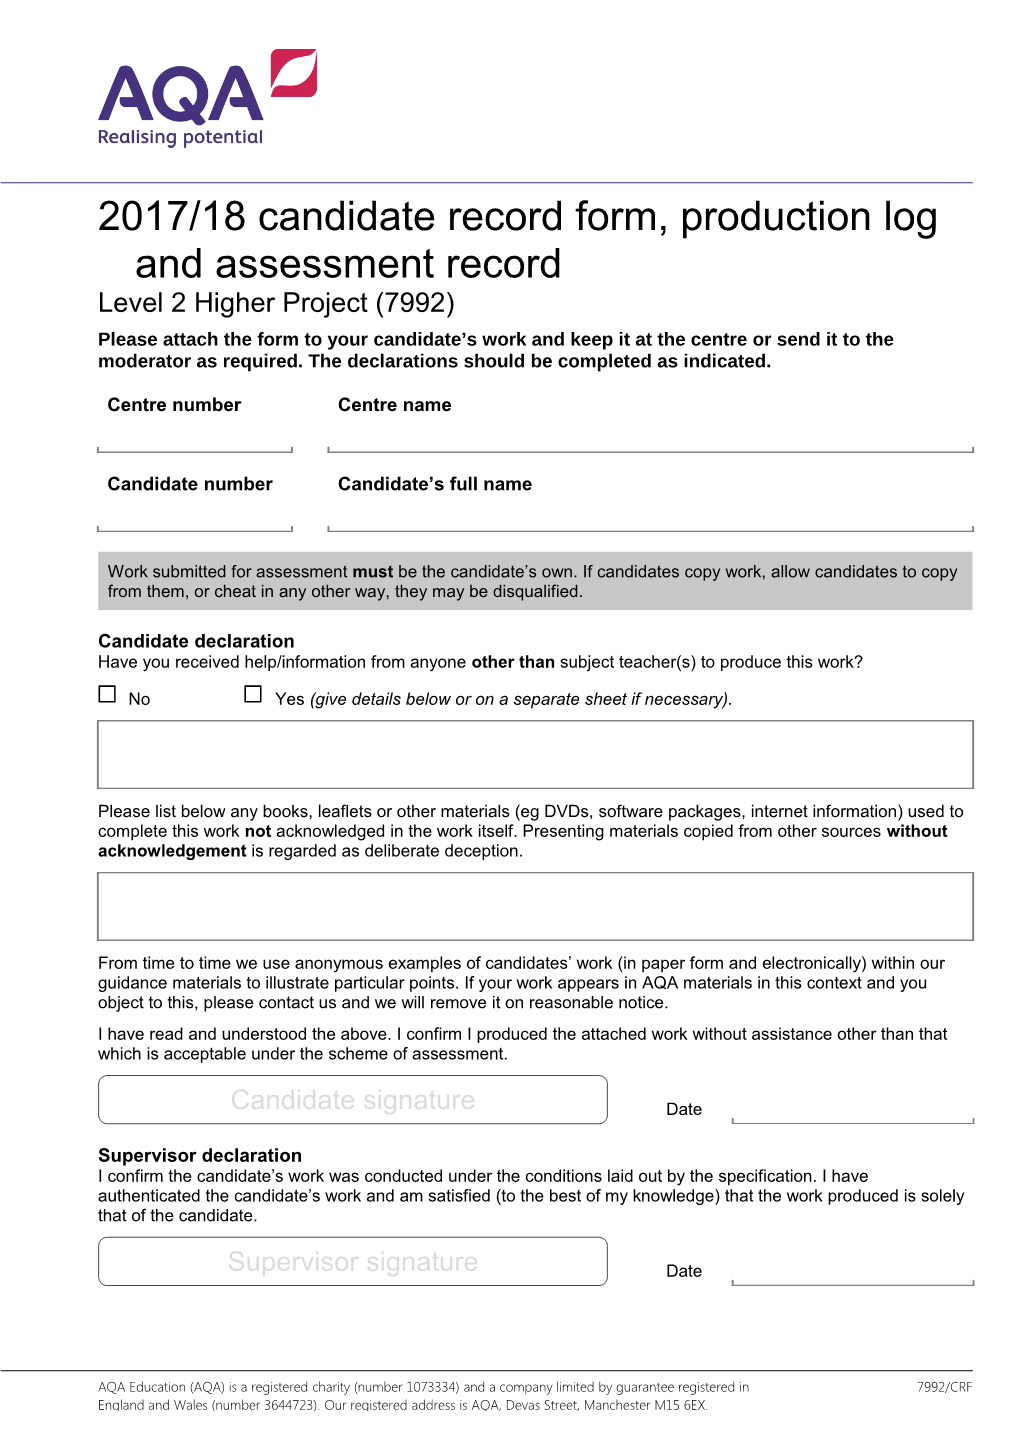 2017/18 Candidate Record Form, Production Logand Assessment Record